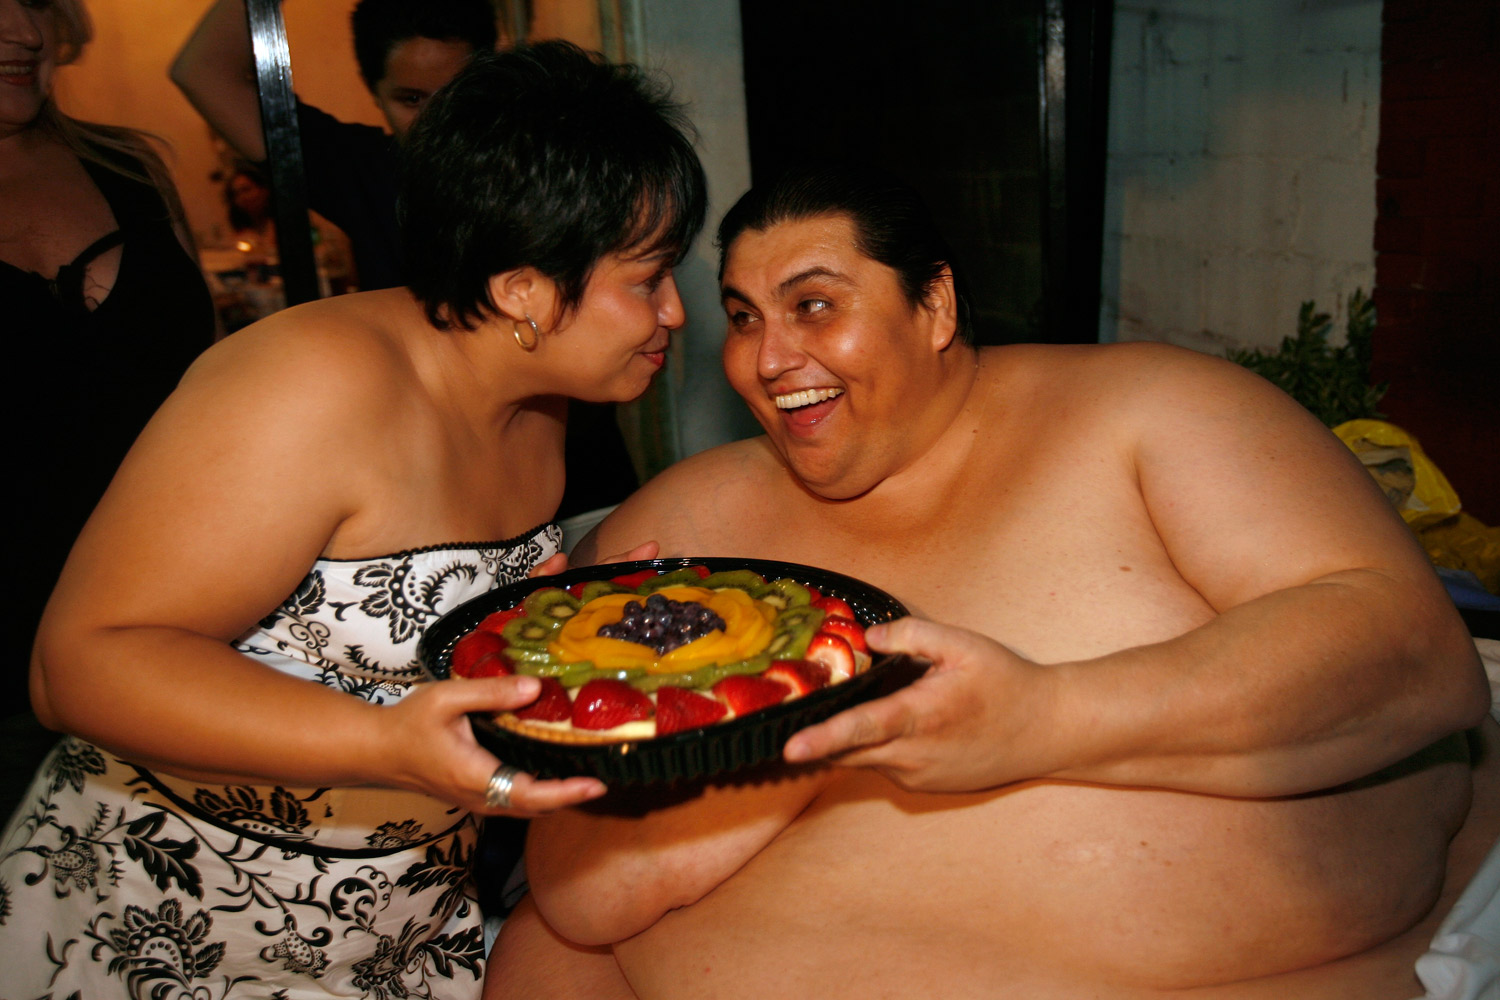 Manuel Uribe jokes as he holds a fruit cake with his girlfriend Claudia Solis outside his house in the suburb of San Nicolas de los Garza in the northern city of Monterrey, Mexico, June 11, 2008. (Tomas Bravo / Reuters)